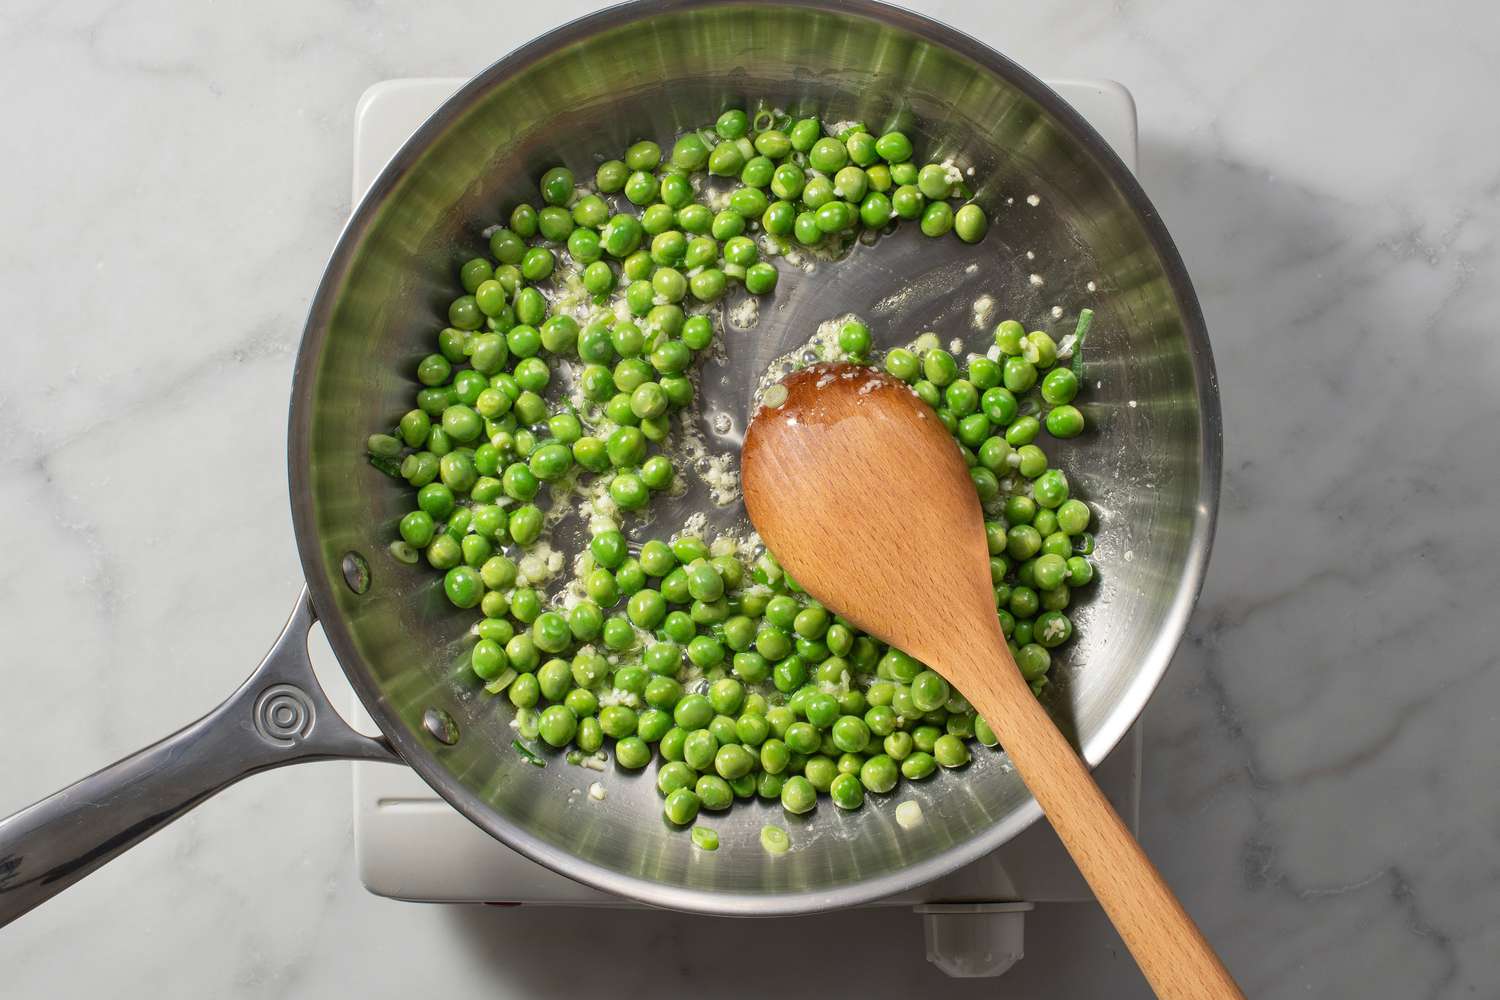 Peas, garlic, and scallions cooking in olive oil and butter